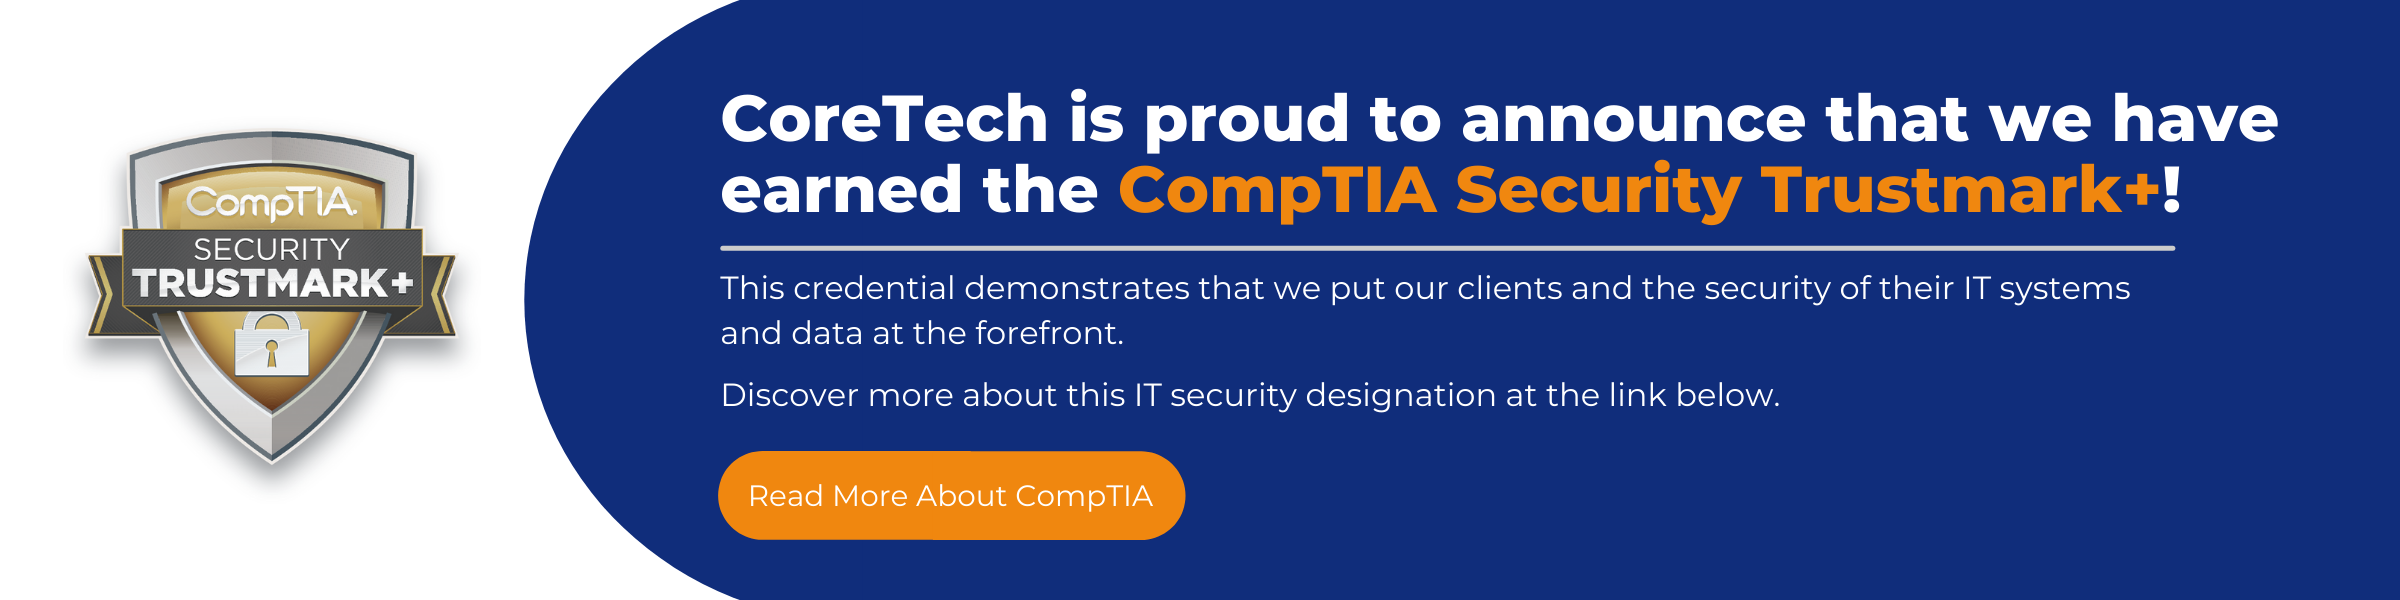 CoreTech is proud to announce that we have earned the CompTIA Security Trustmark+!